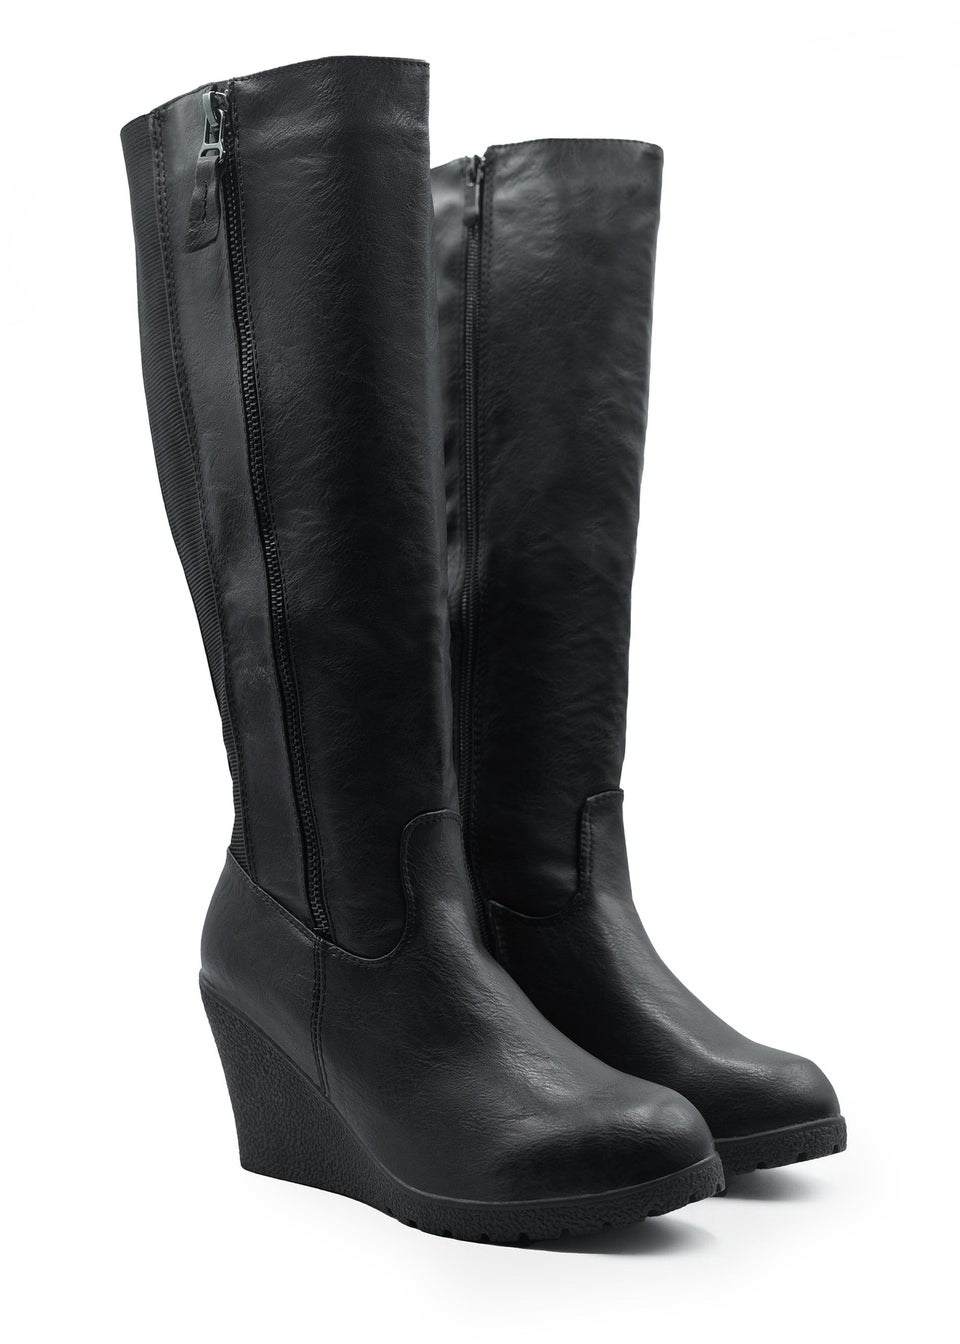 Where's That From Black Pu Lara Mid Calf Boots